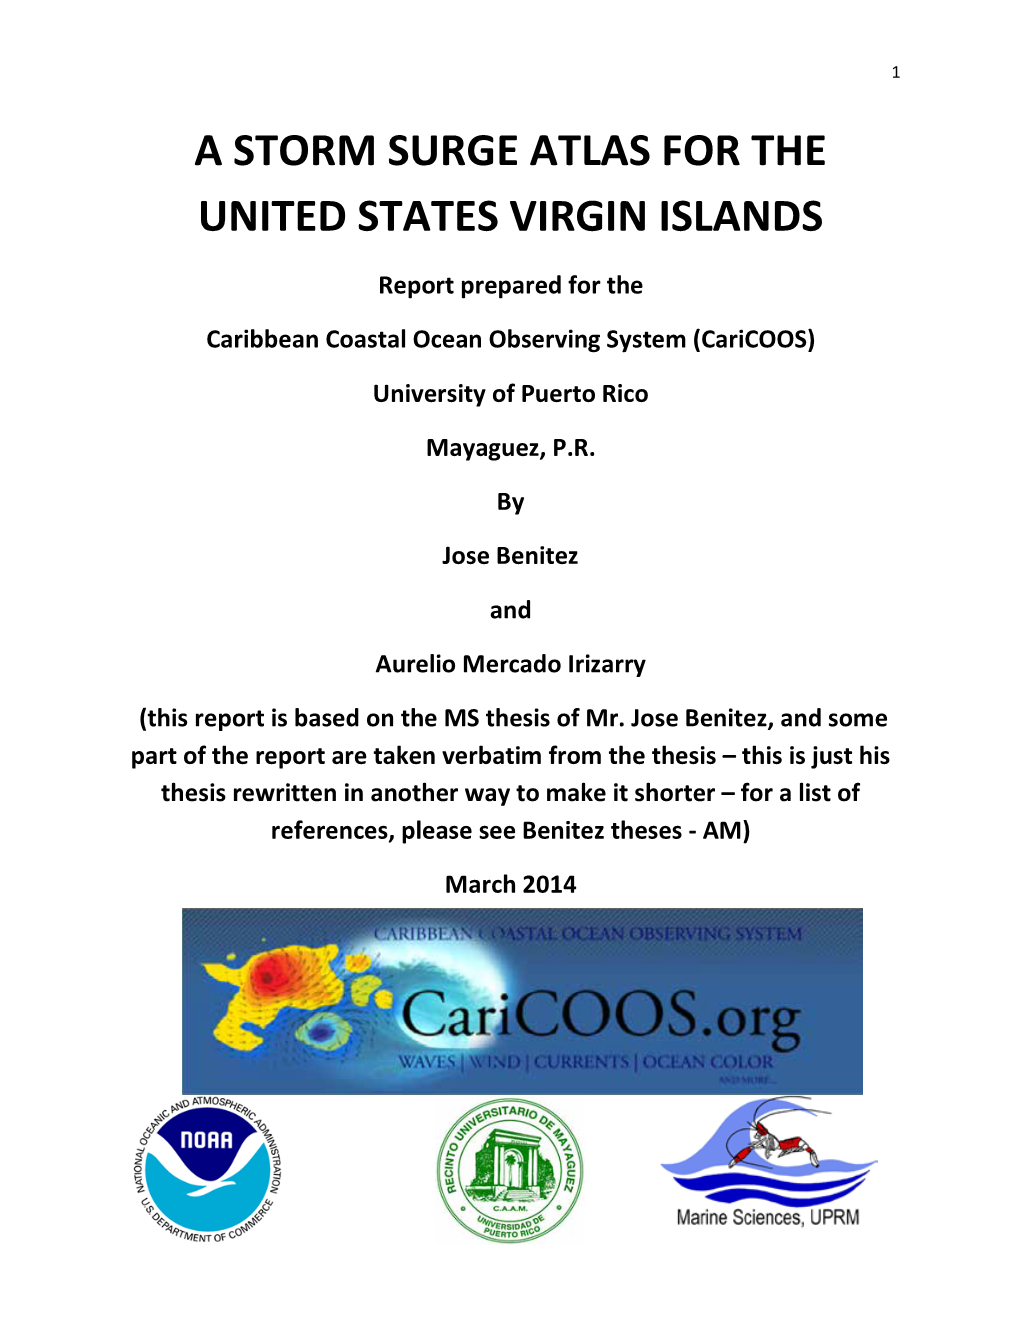 A Storm Surge Atlas for the United States Virgin Islands